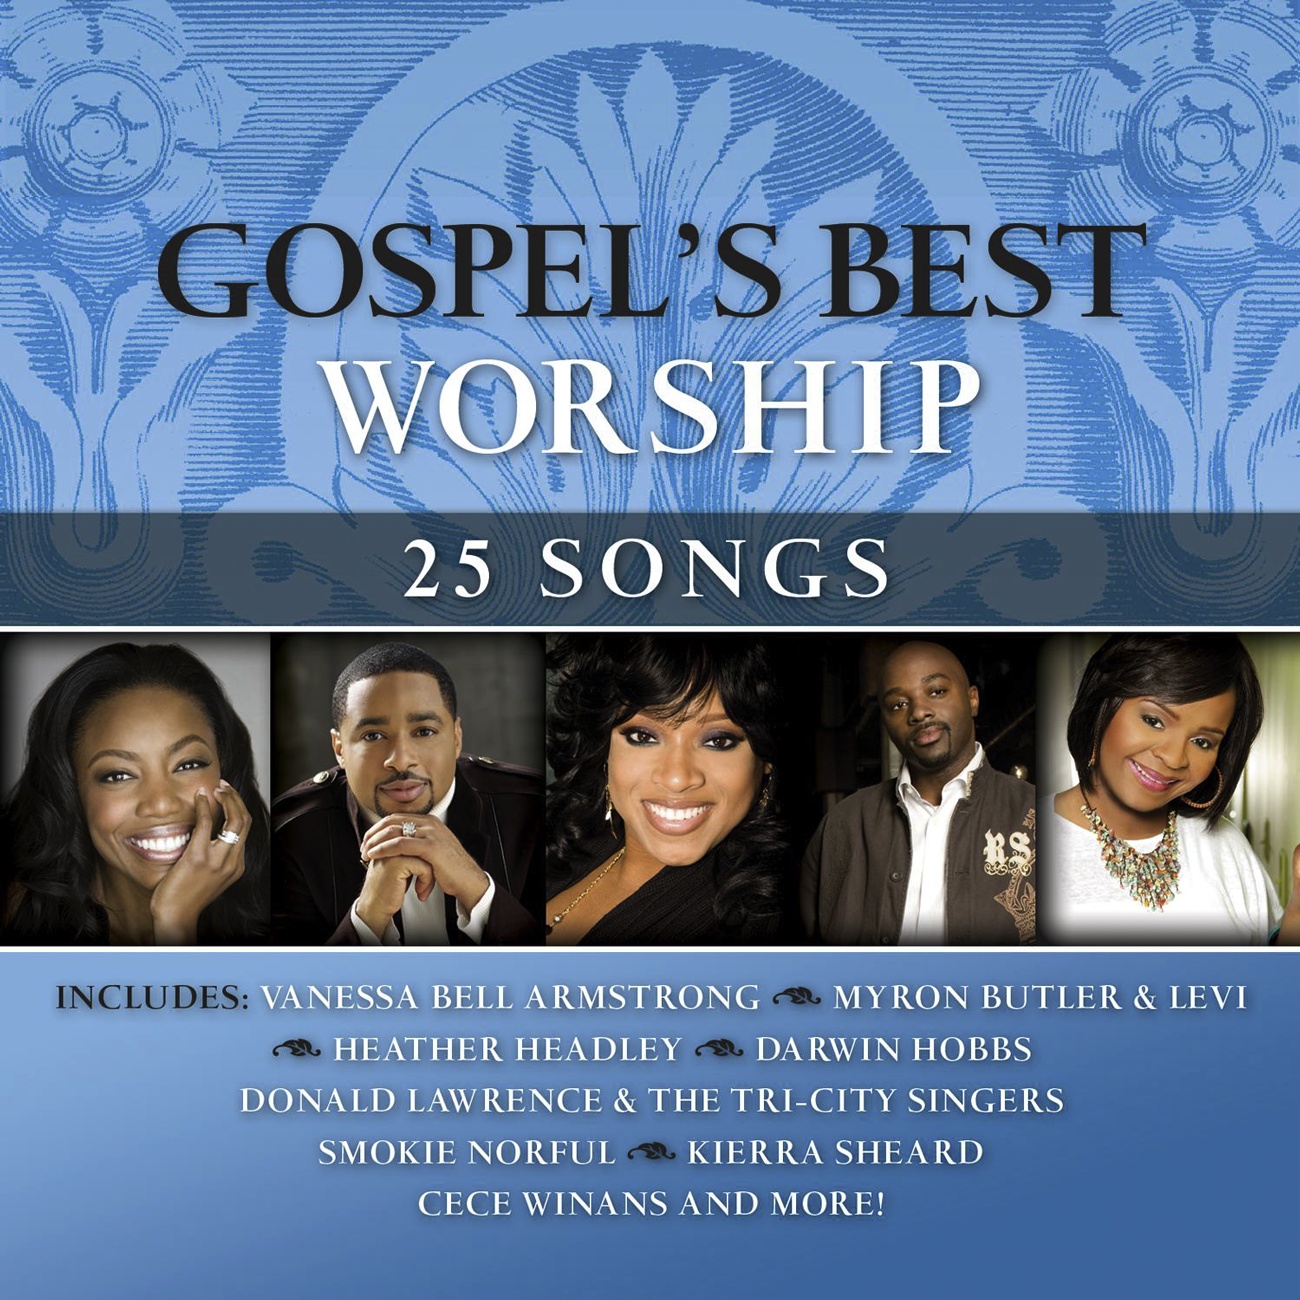 Medley: I Just Want To Praise You & The Greatest Thing In All My Life